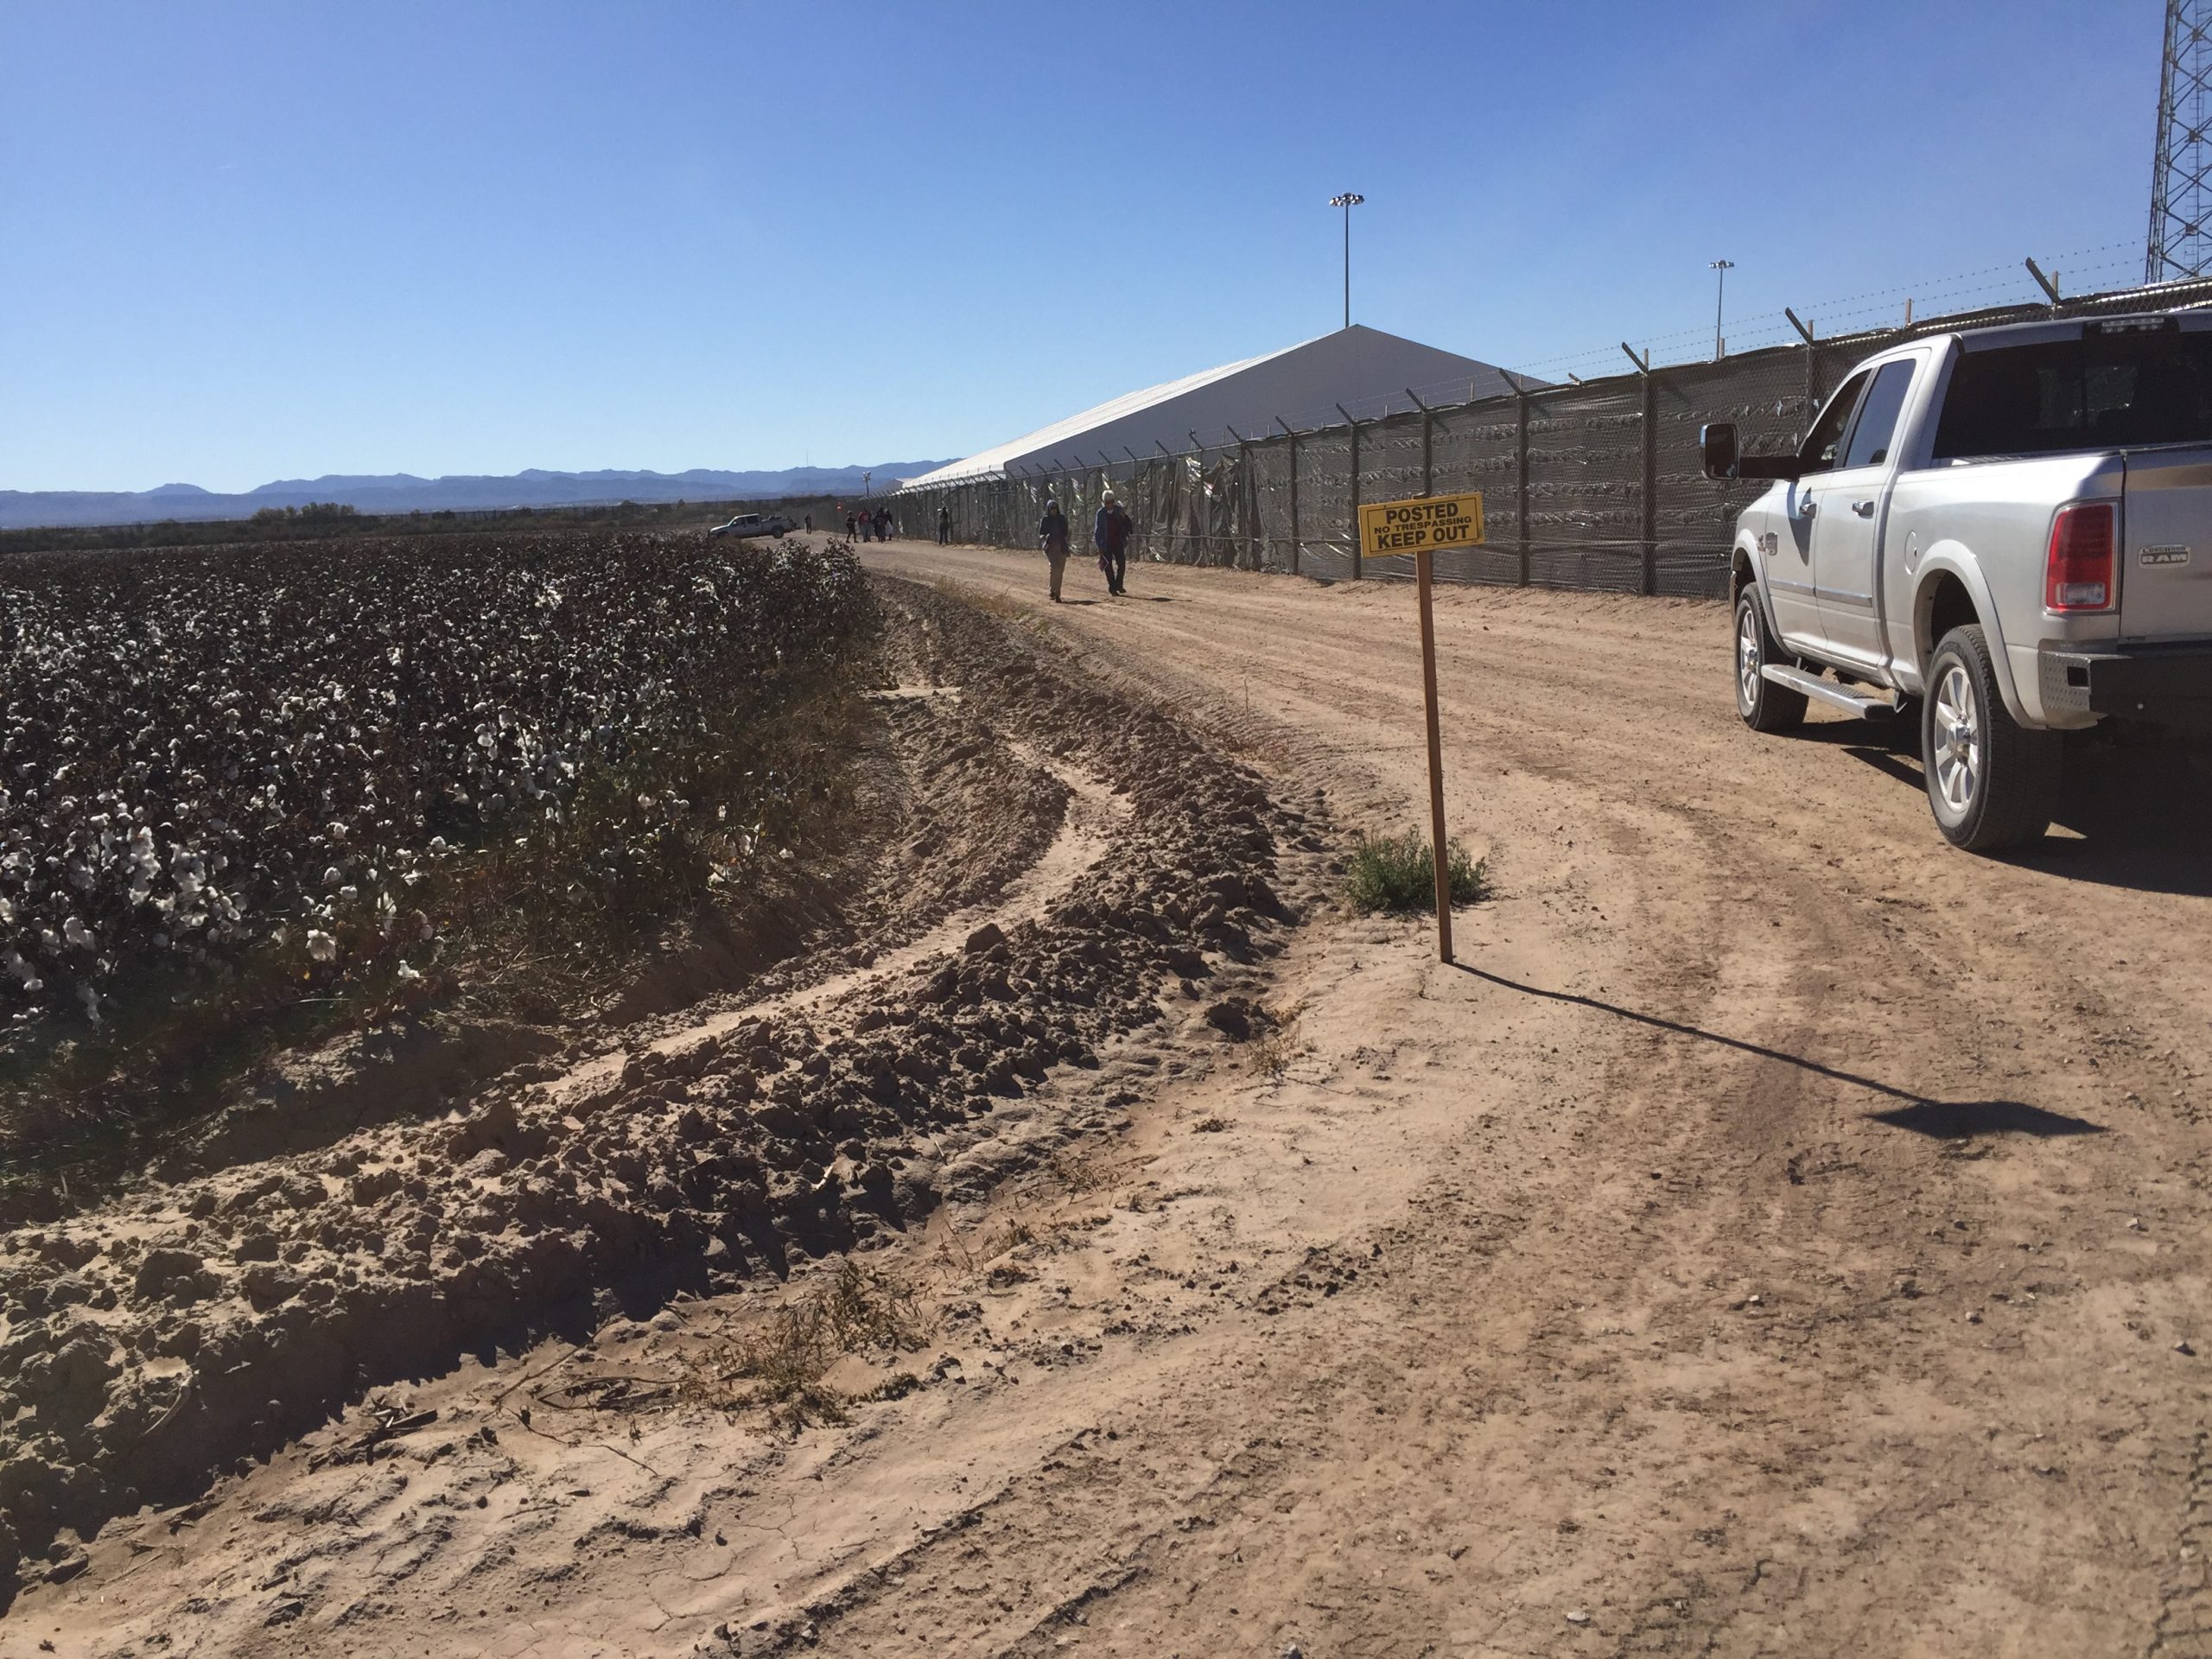 A view of the Tornillo detention camp.